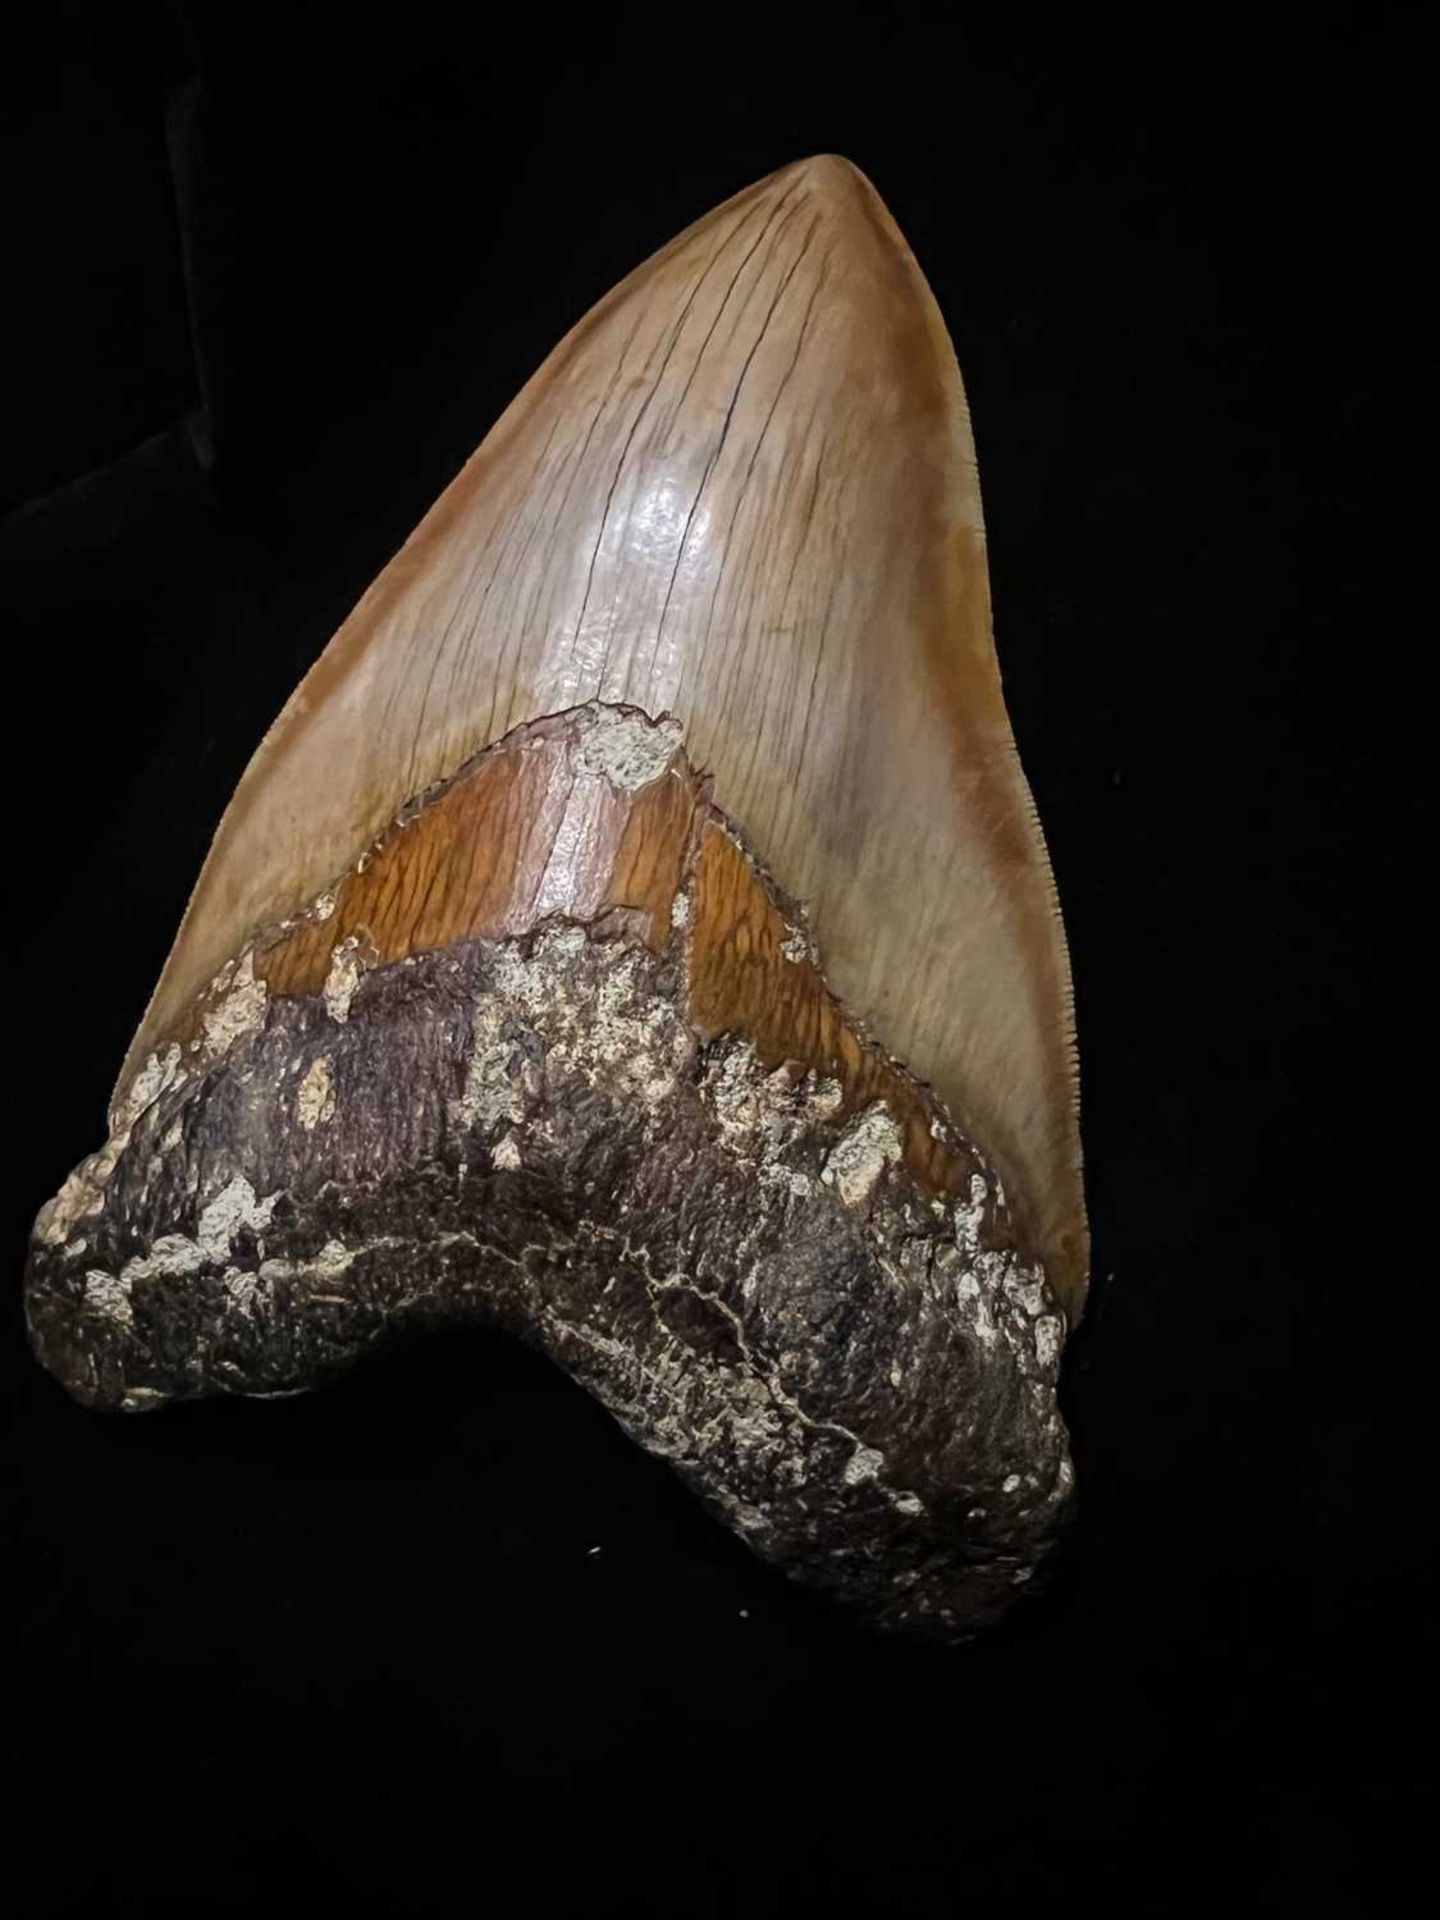 A LARGE FOSSILISED, EXTINCT MEGALODON SHARK TOOTH - Image 4 of 5